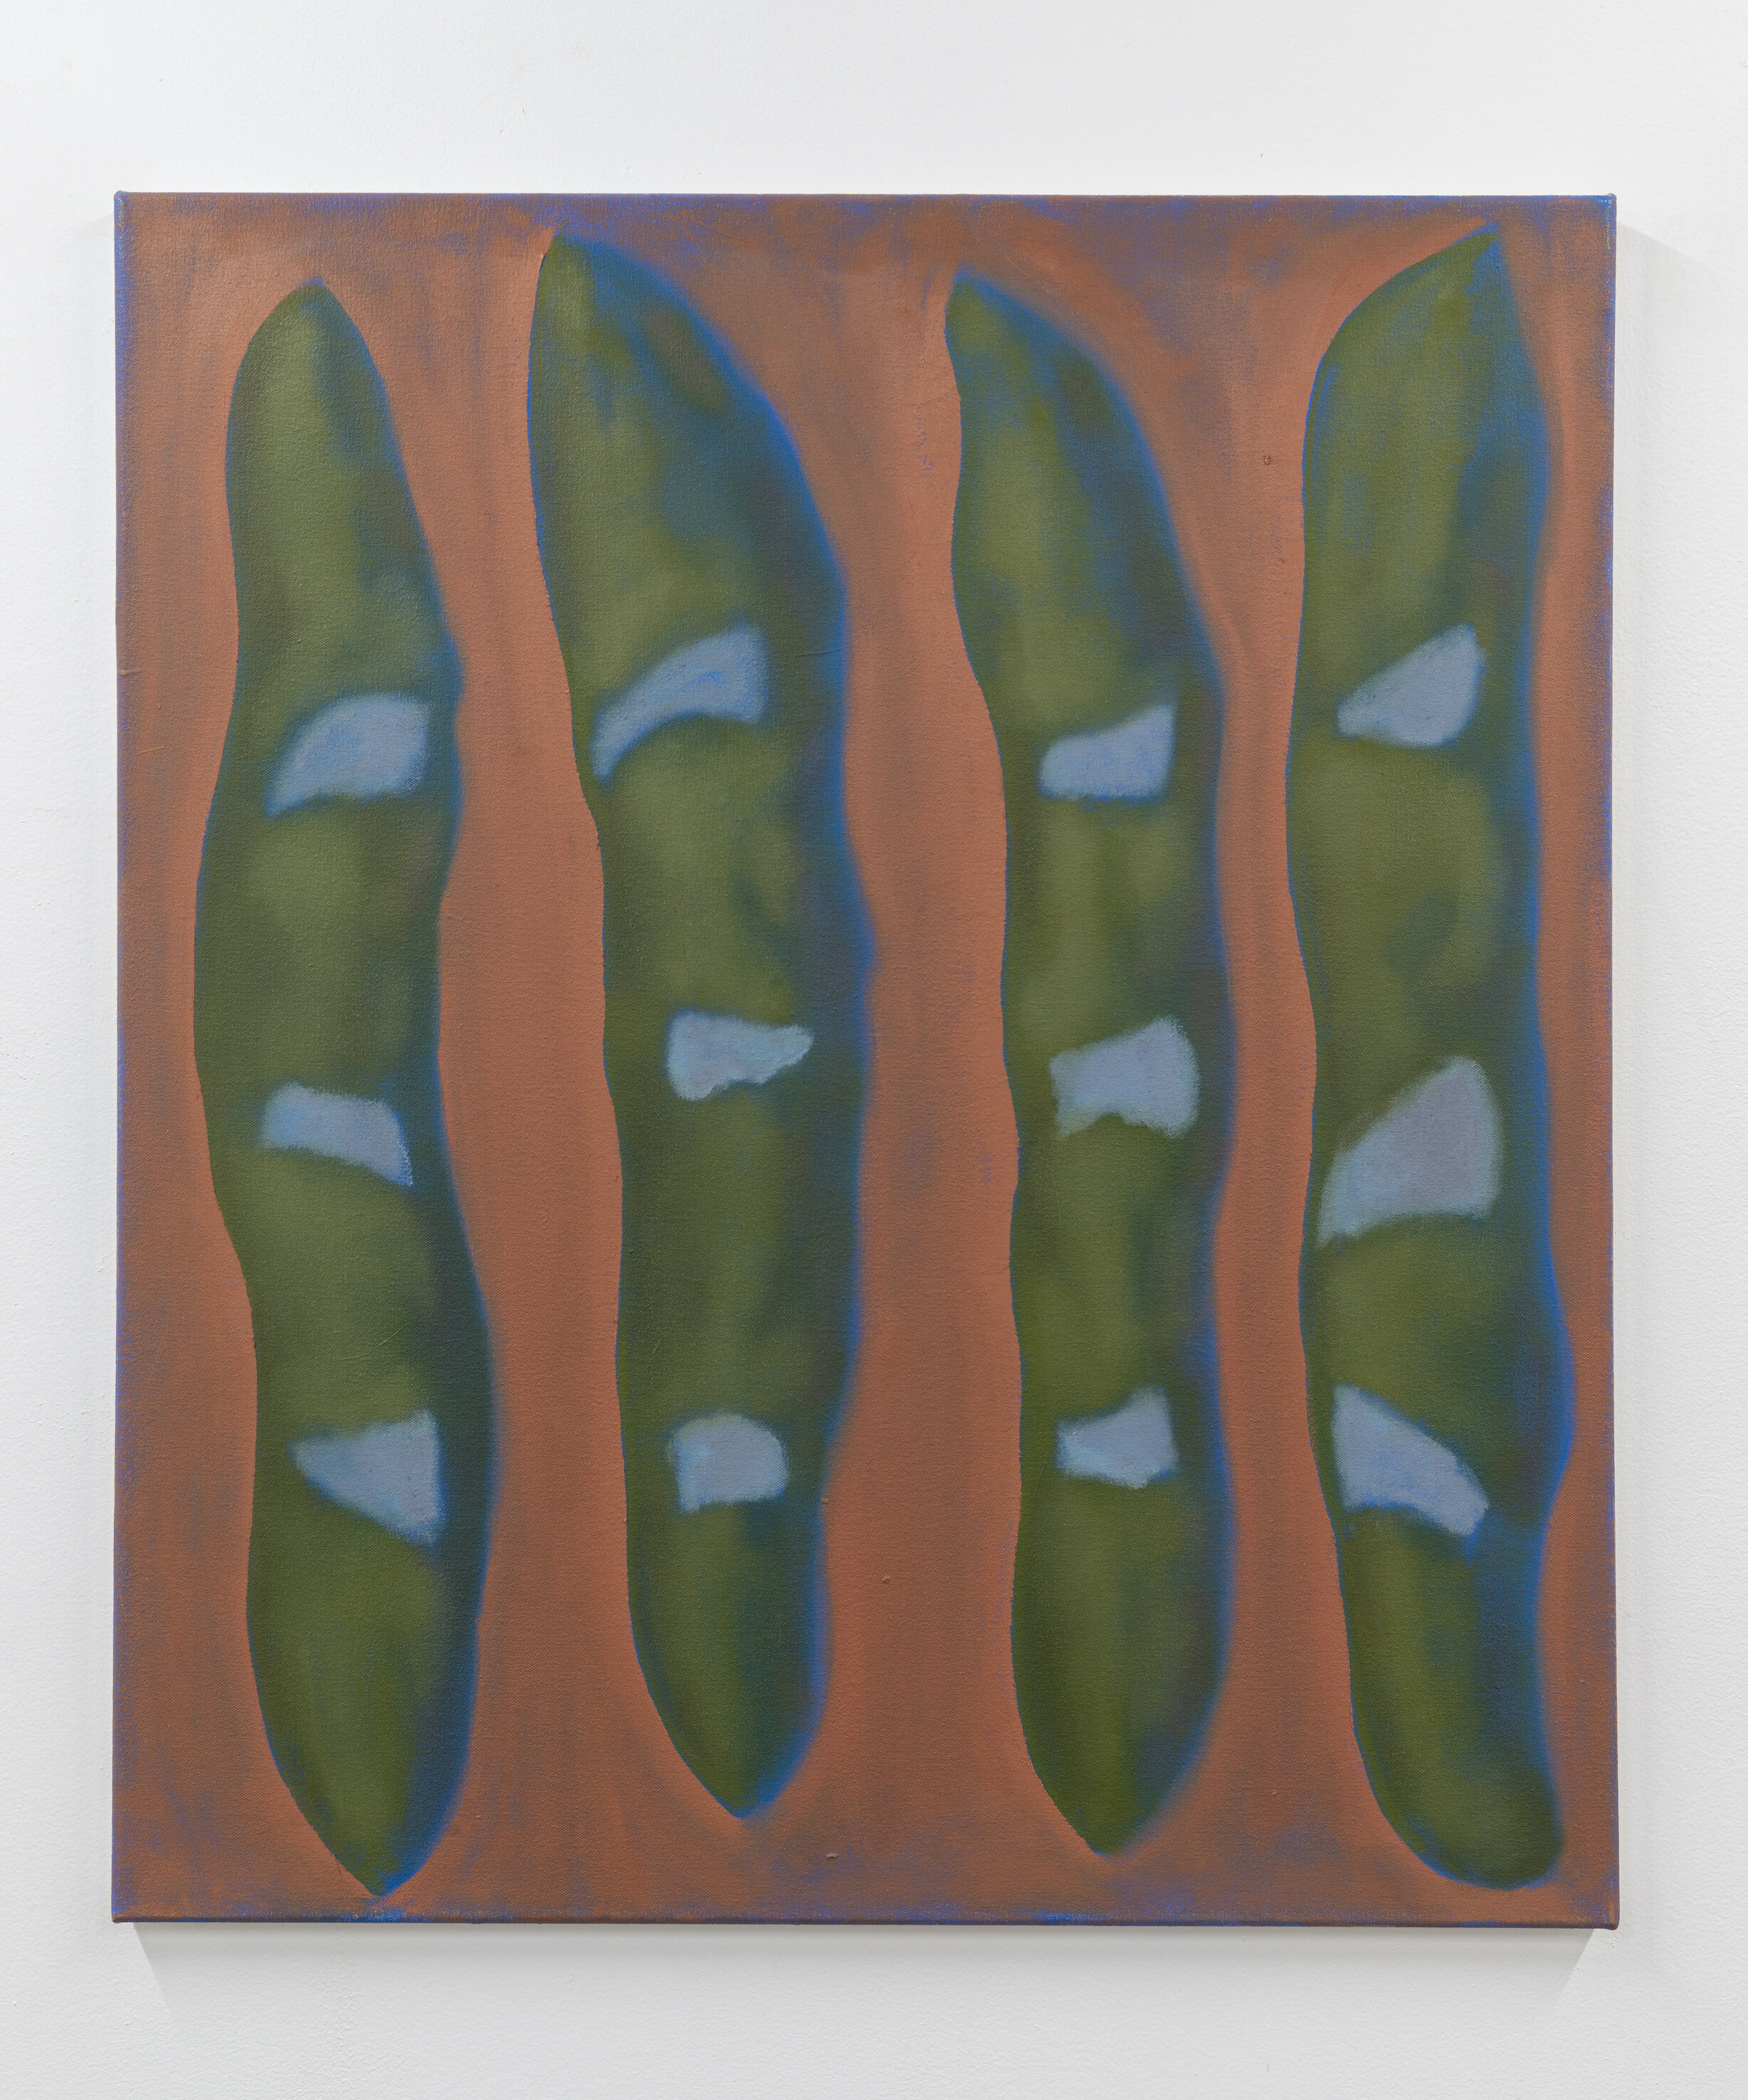  George Gittins,  Baguettes (no. 12),  2017  Oil and flashe on canvas  31 x 27 inches  